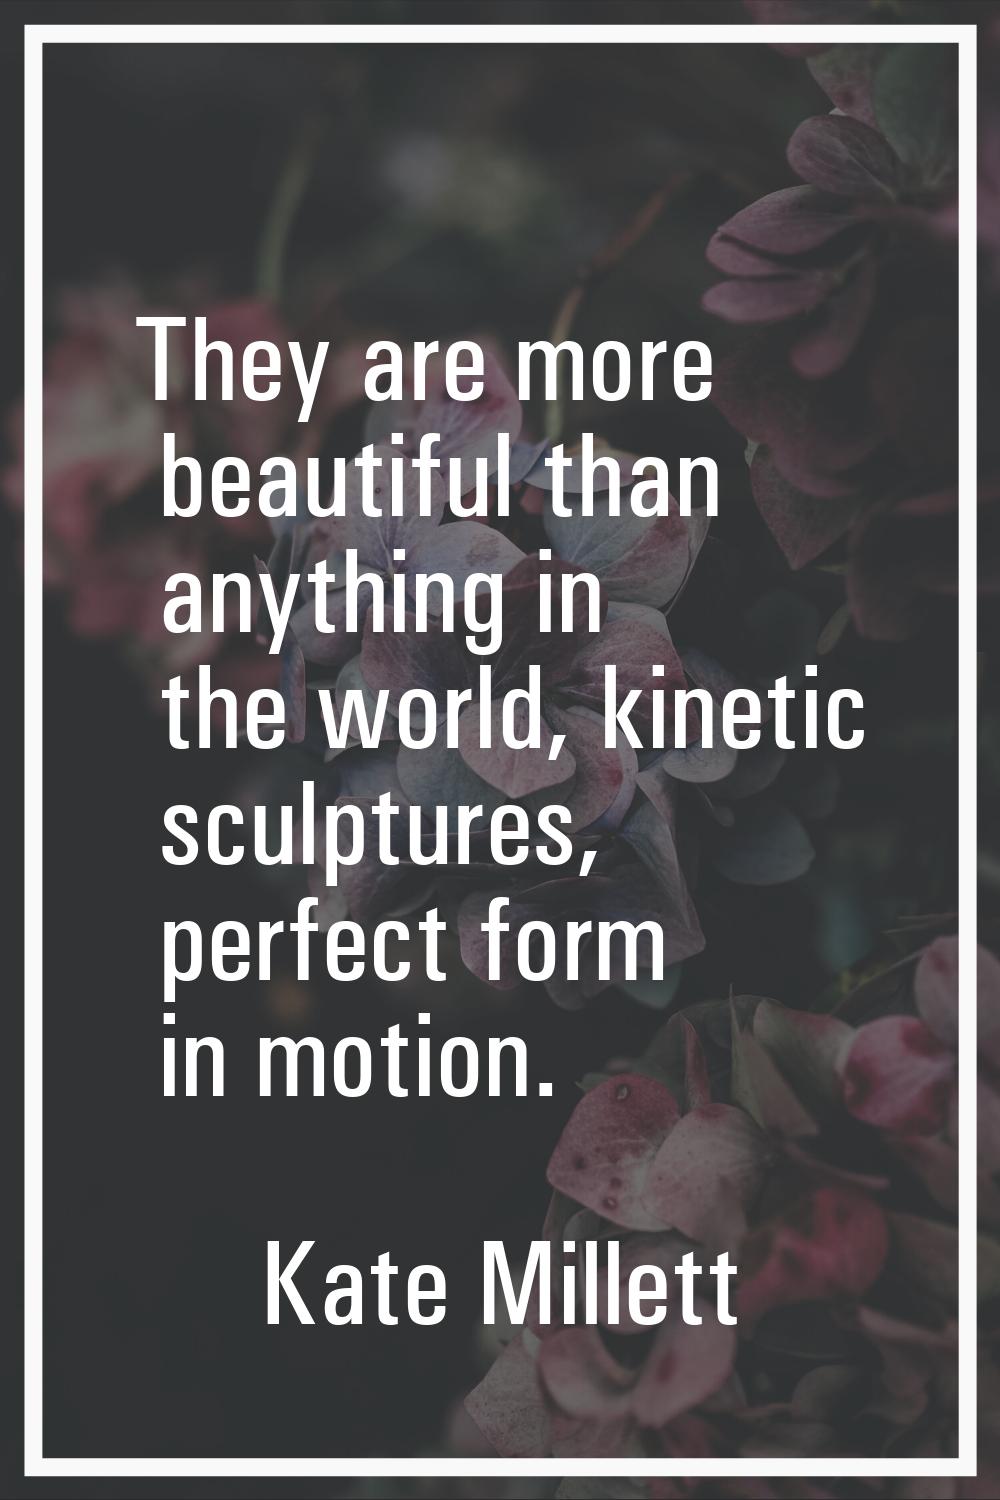 They are more beautiful than anything in the world, kinetic sculptures, perfect form in motion.